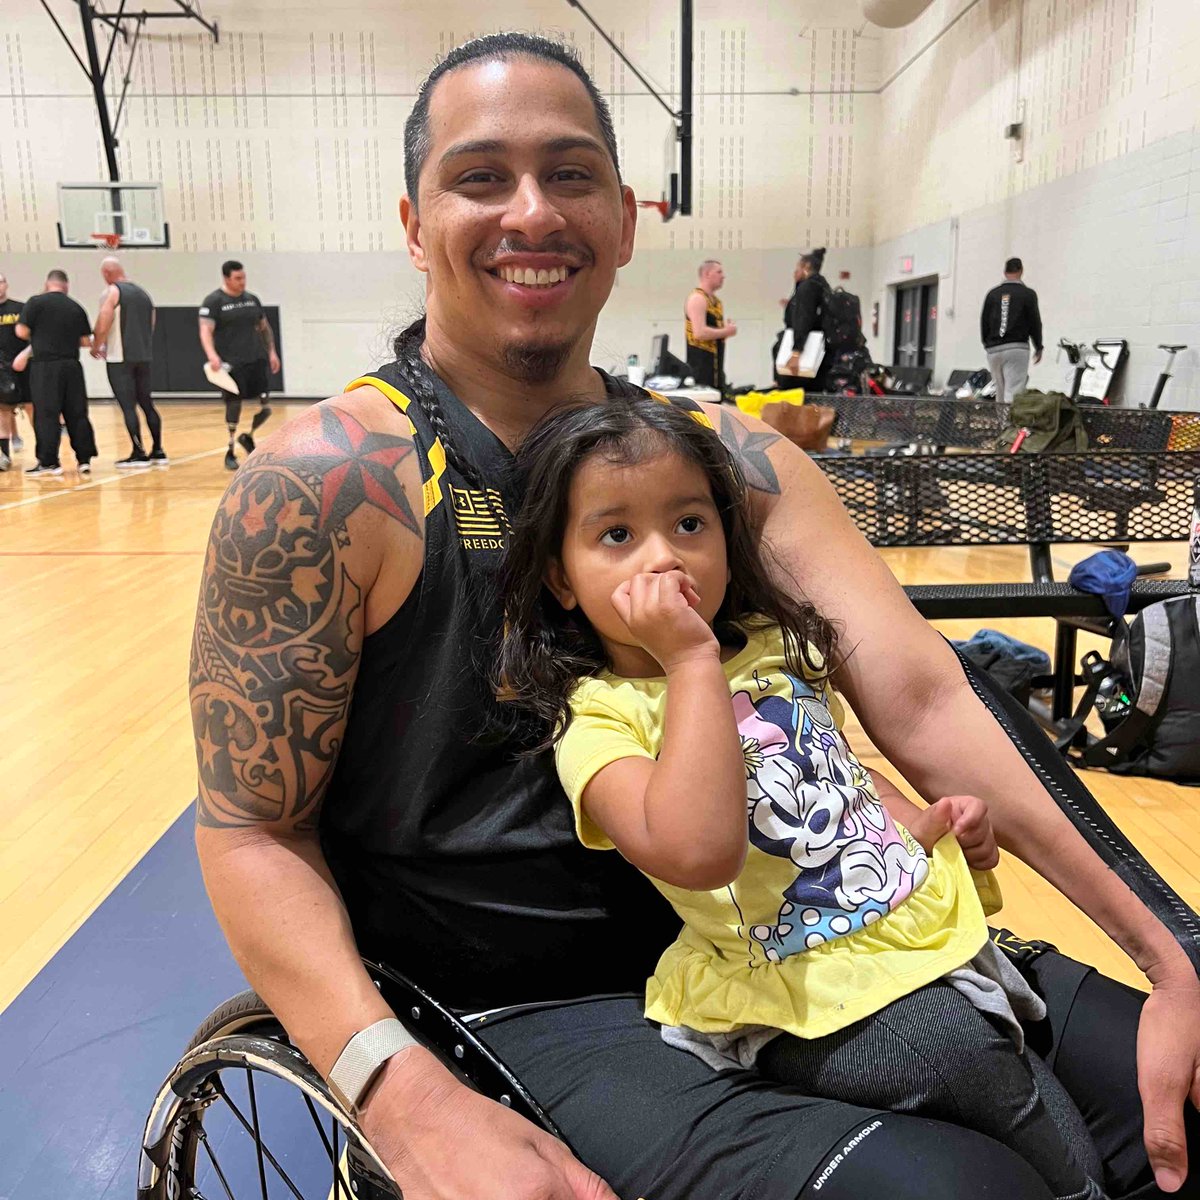 Coach Joel and his adorable little girl showing the athletes the way of wheelchair rugby.

#ARCP #AdaptiveSports #LetsGo #TeamArmyNation #ArmyTrials24 #LittleCoach #CoachesDaughter #RaiseThemRight #FatherDaughter #LittleCoach